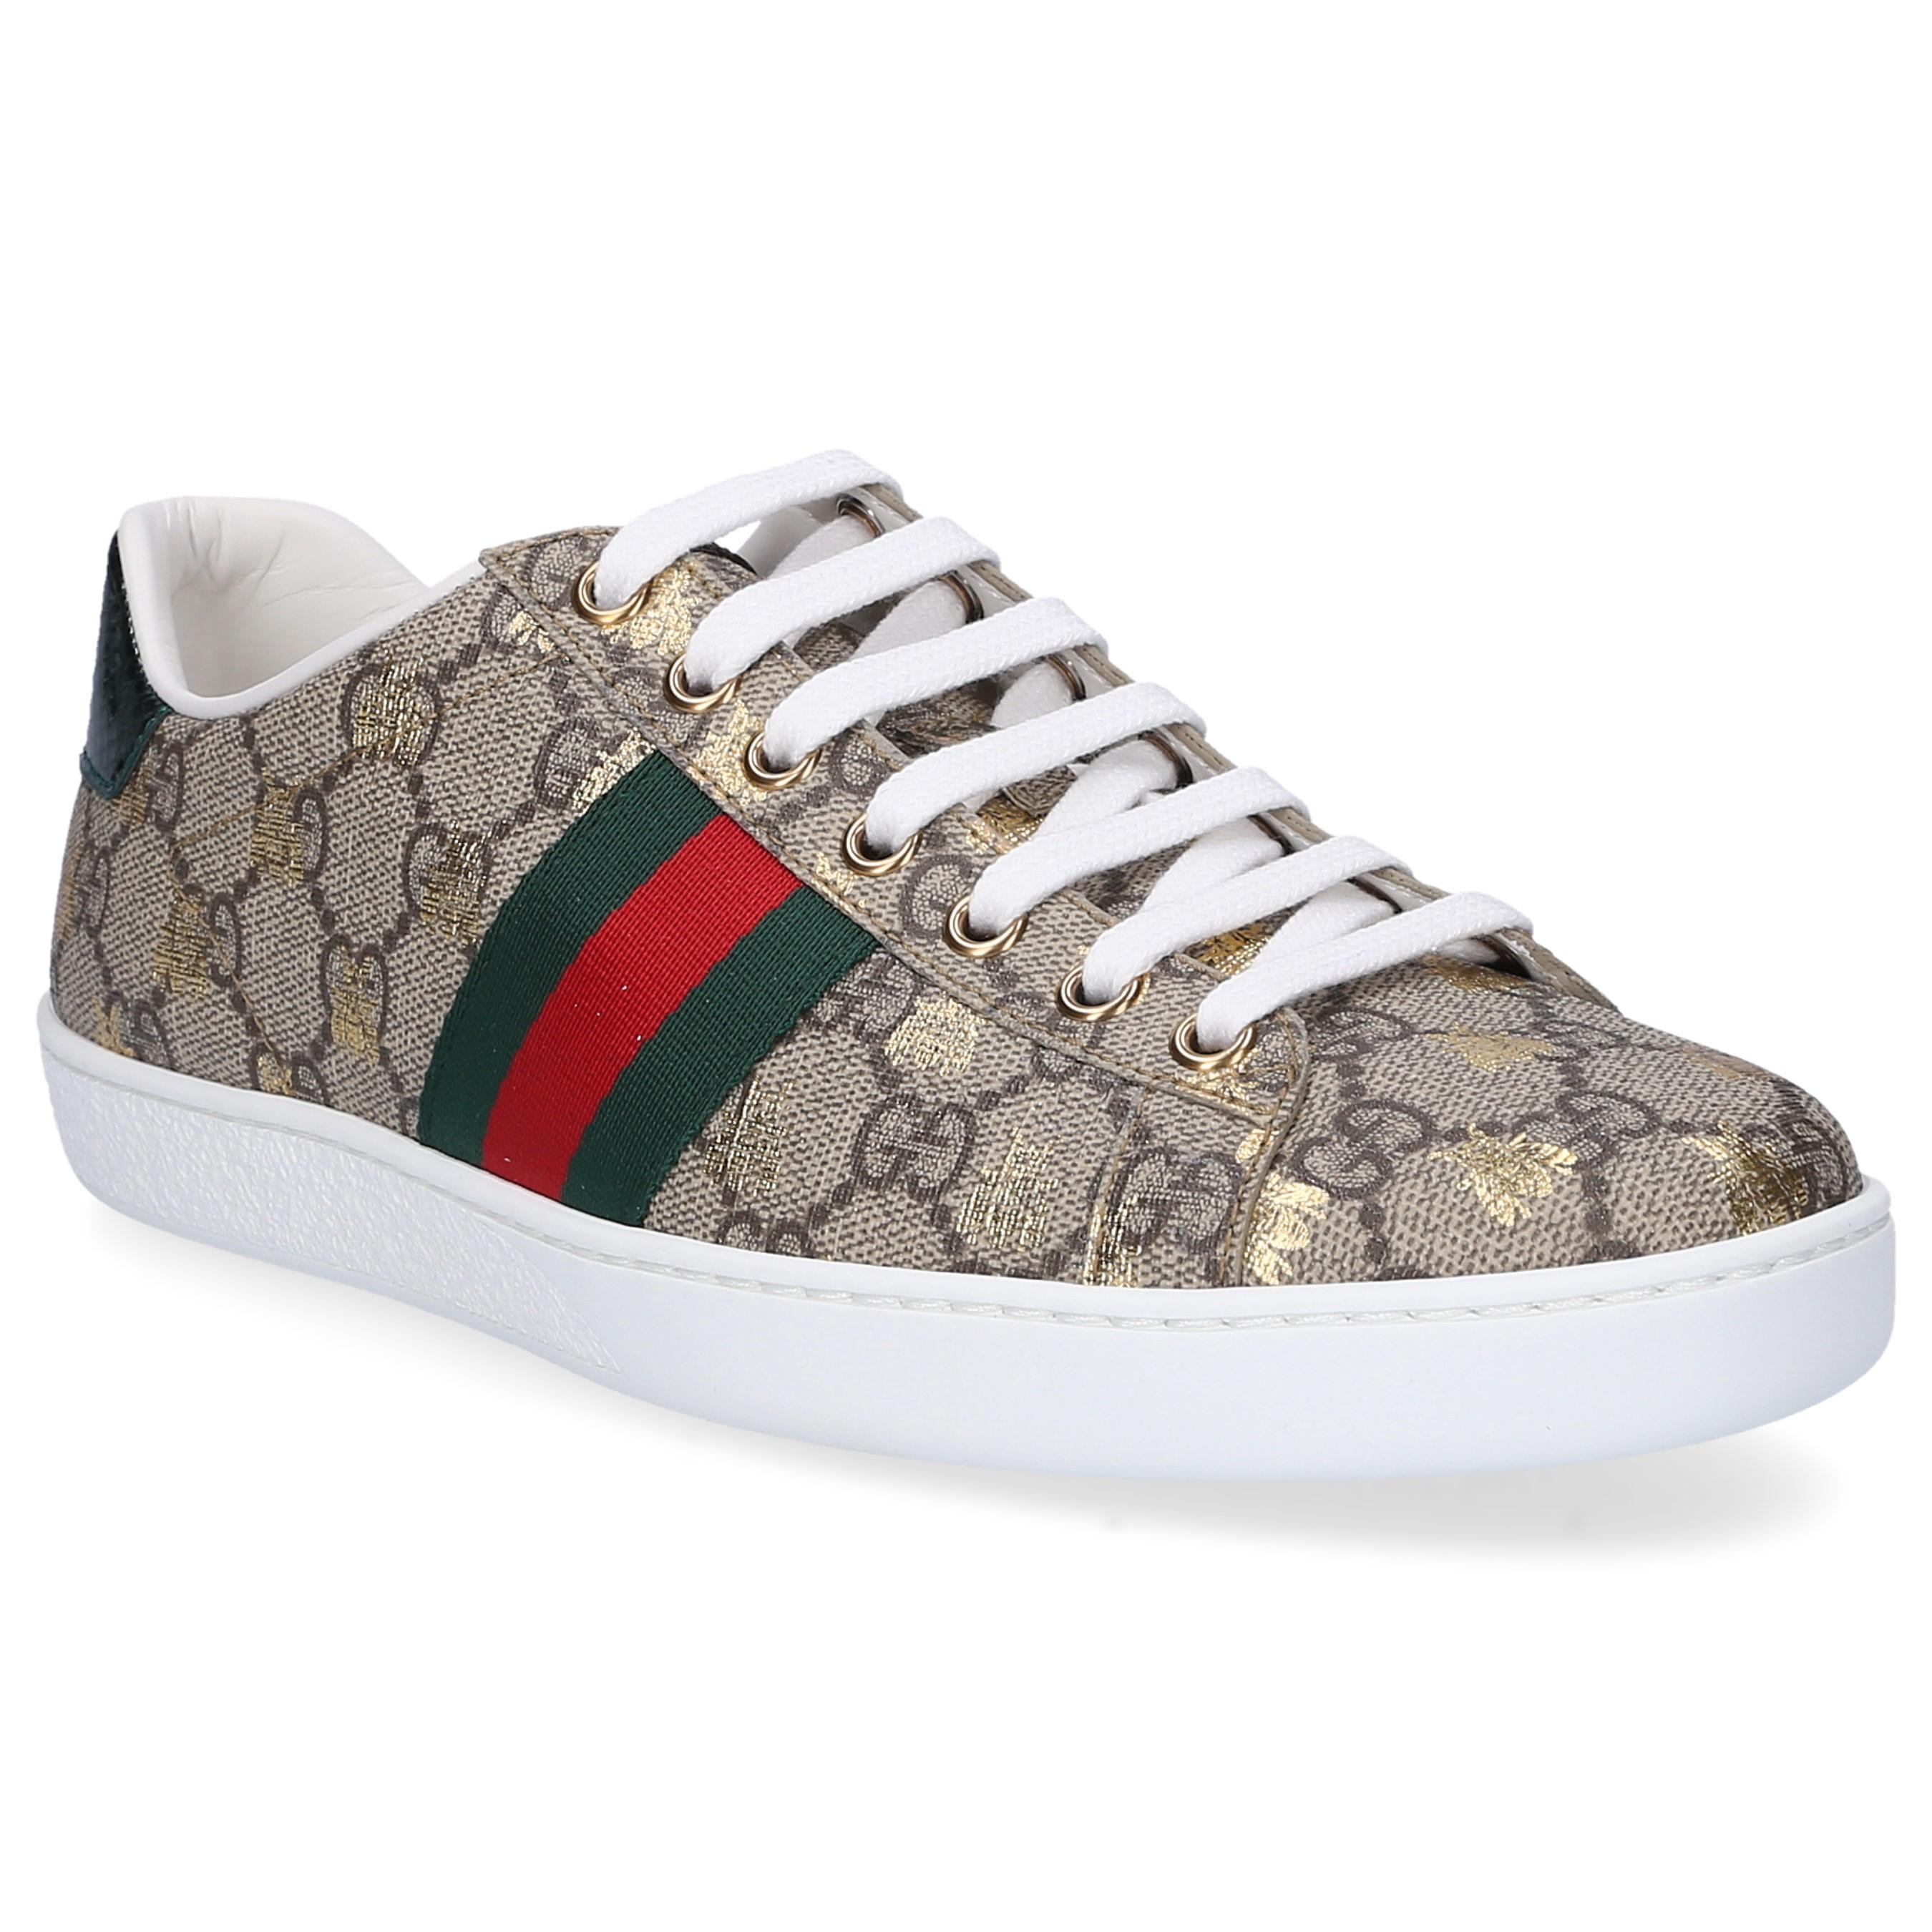 Gucci Canvas Low-top Sneakers New Ace Sneaker in Brown - Save 1% - Lyst